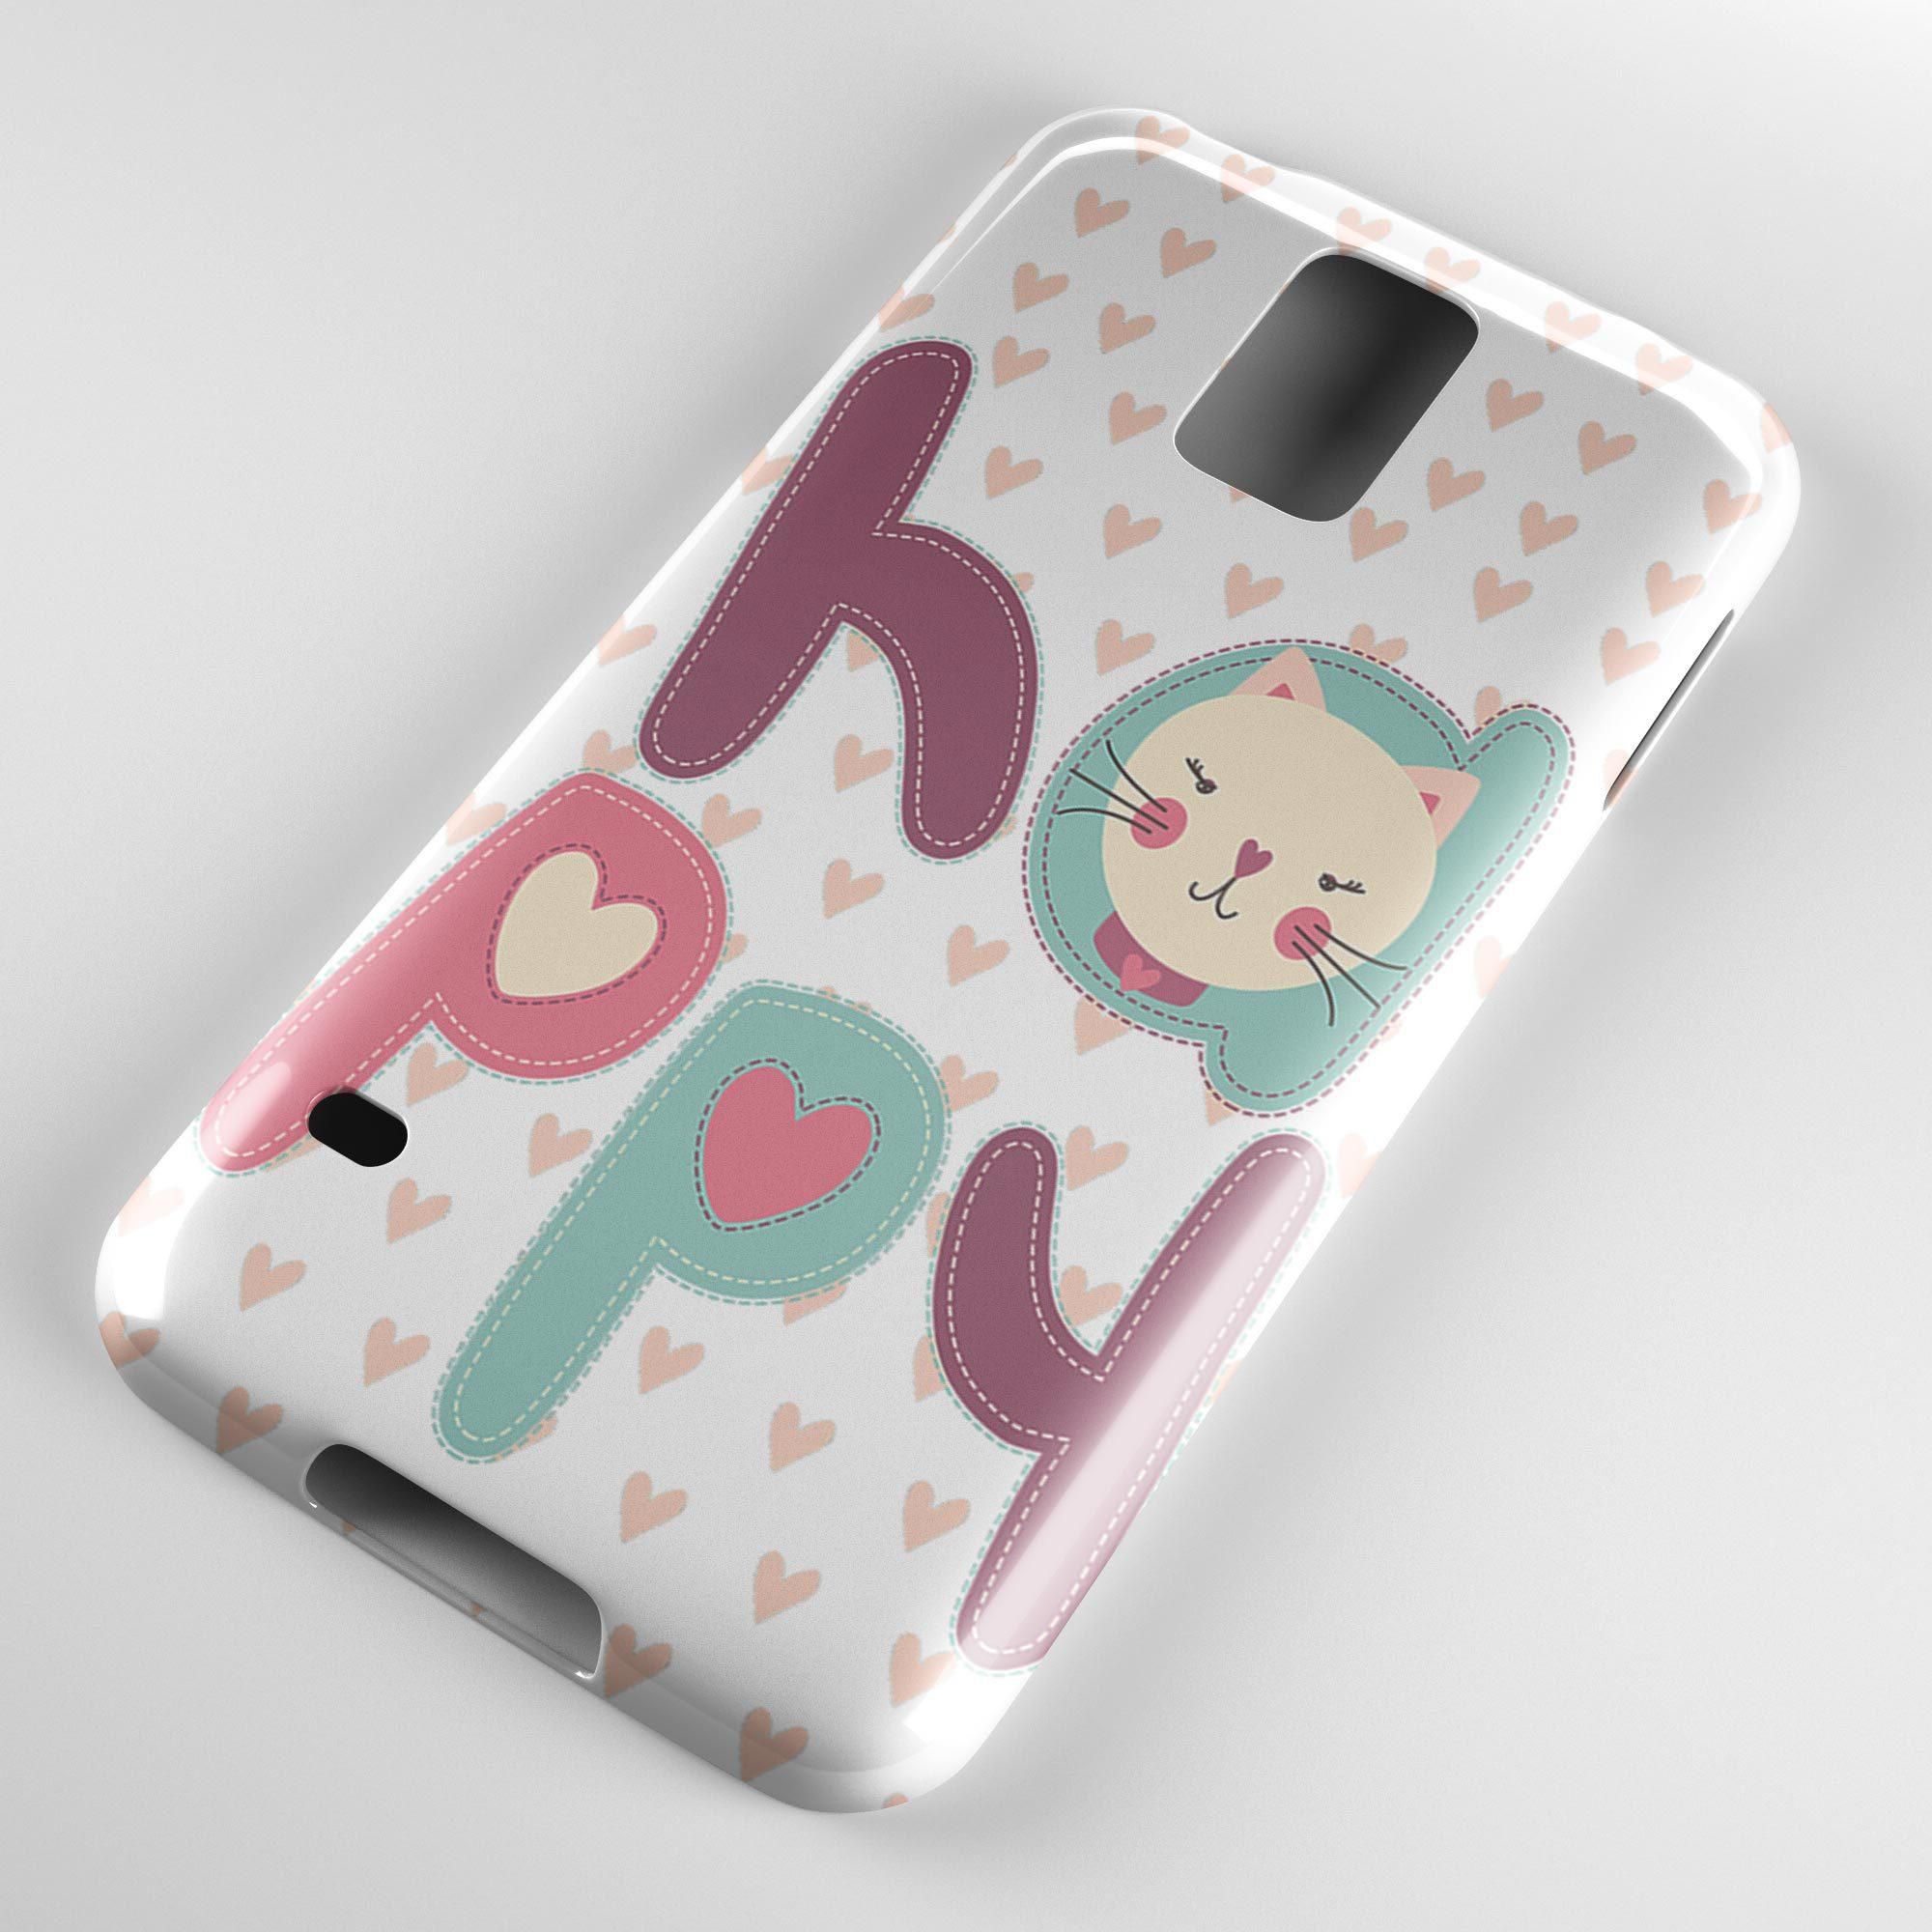 Happy Cat Case With Love Hearts Phone Cover (Covers the edge) for Samsung S5